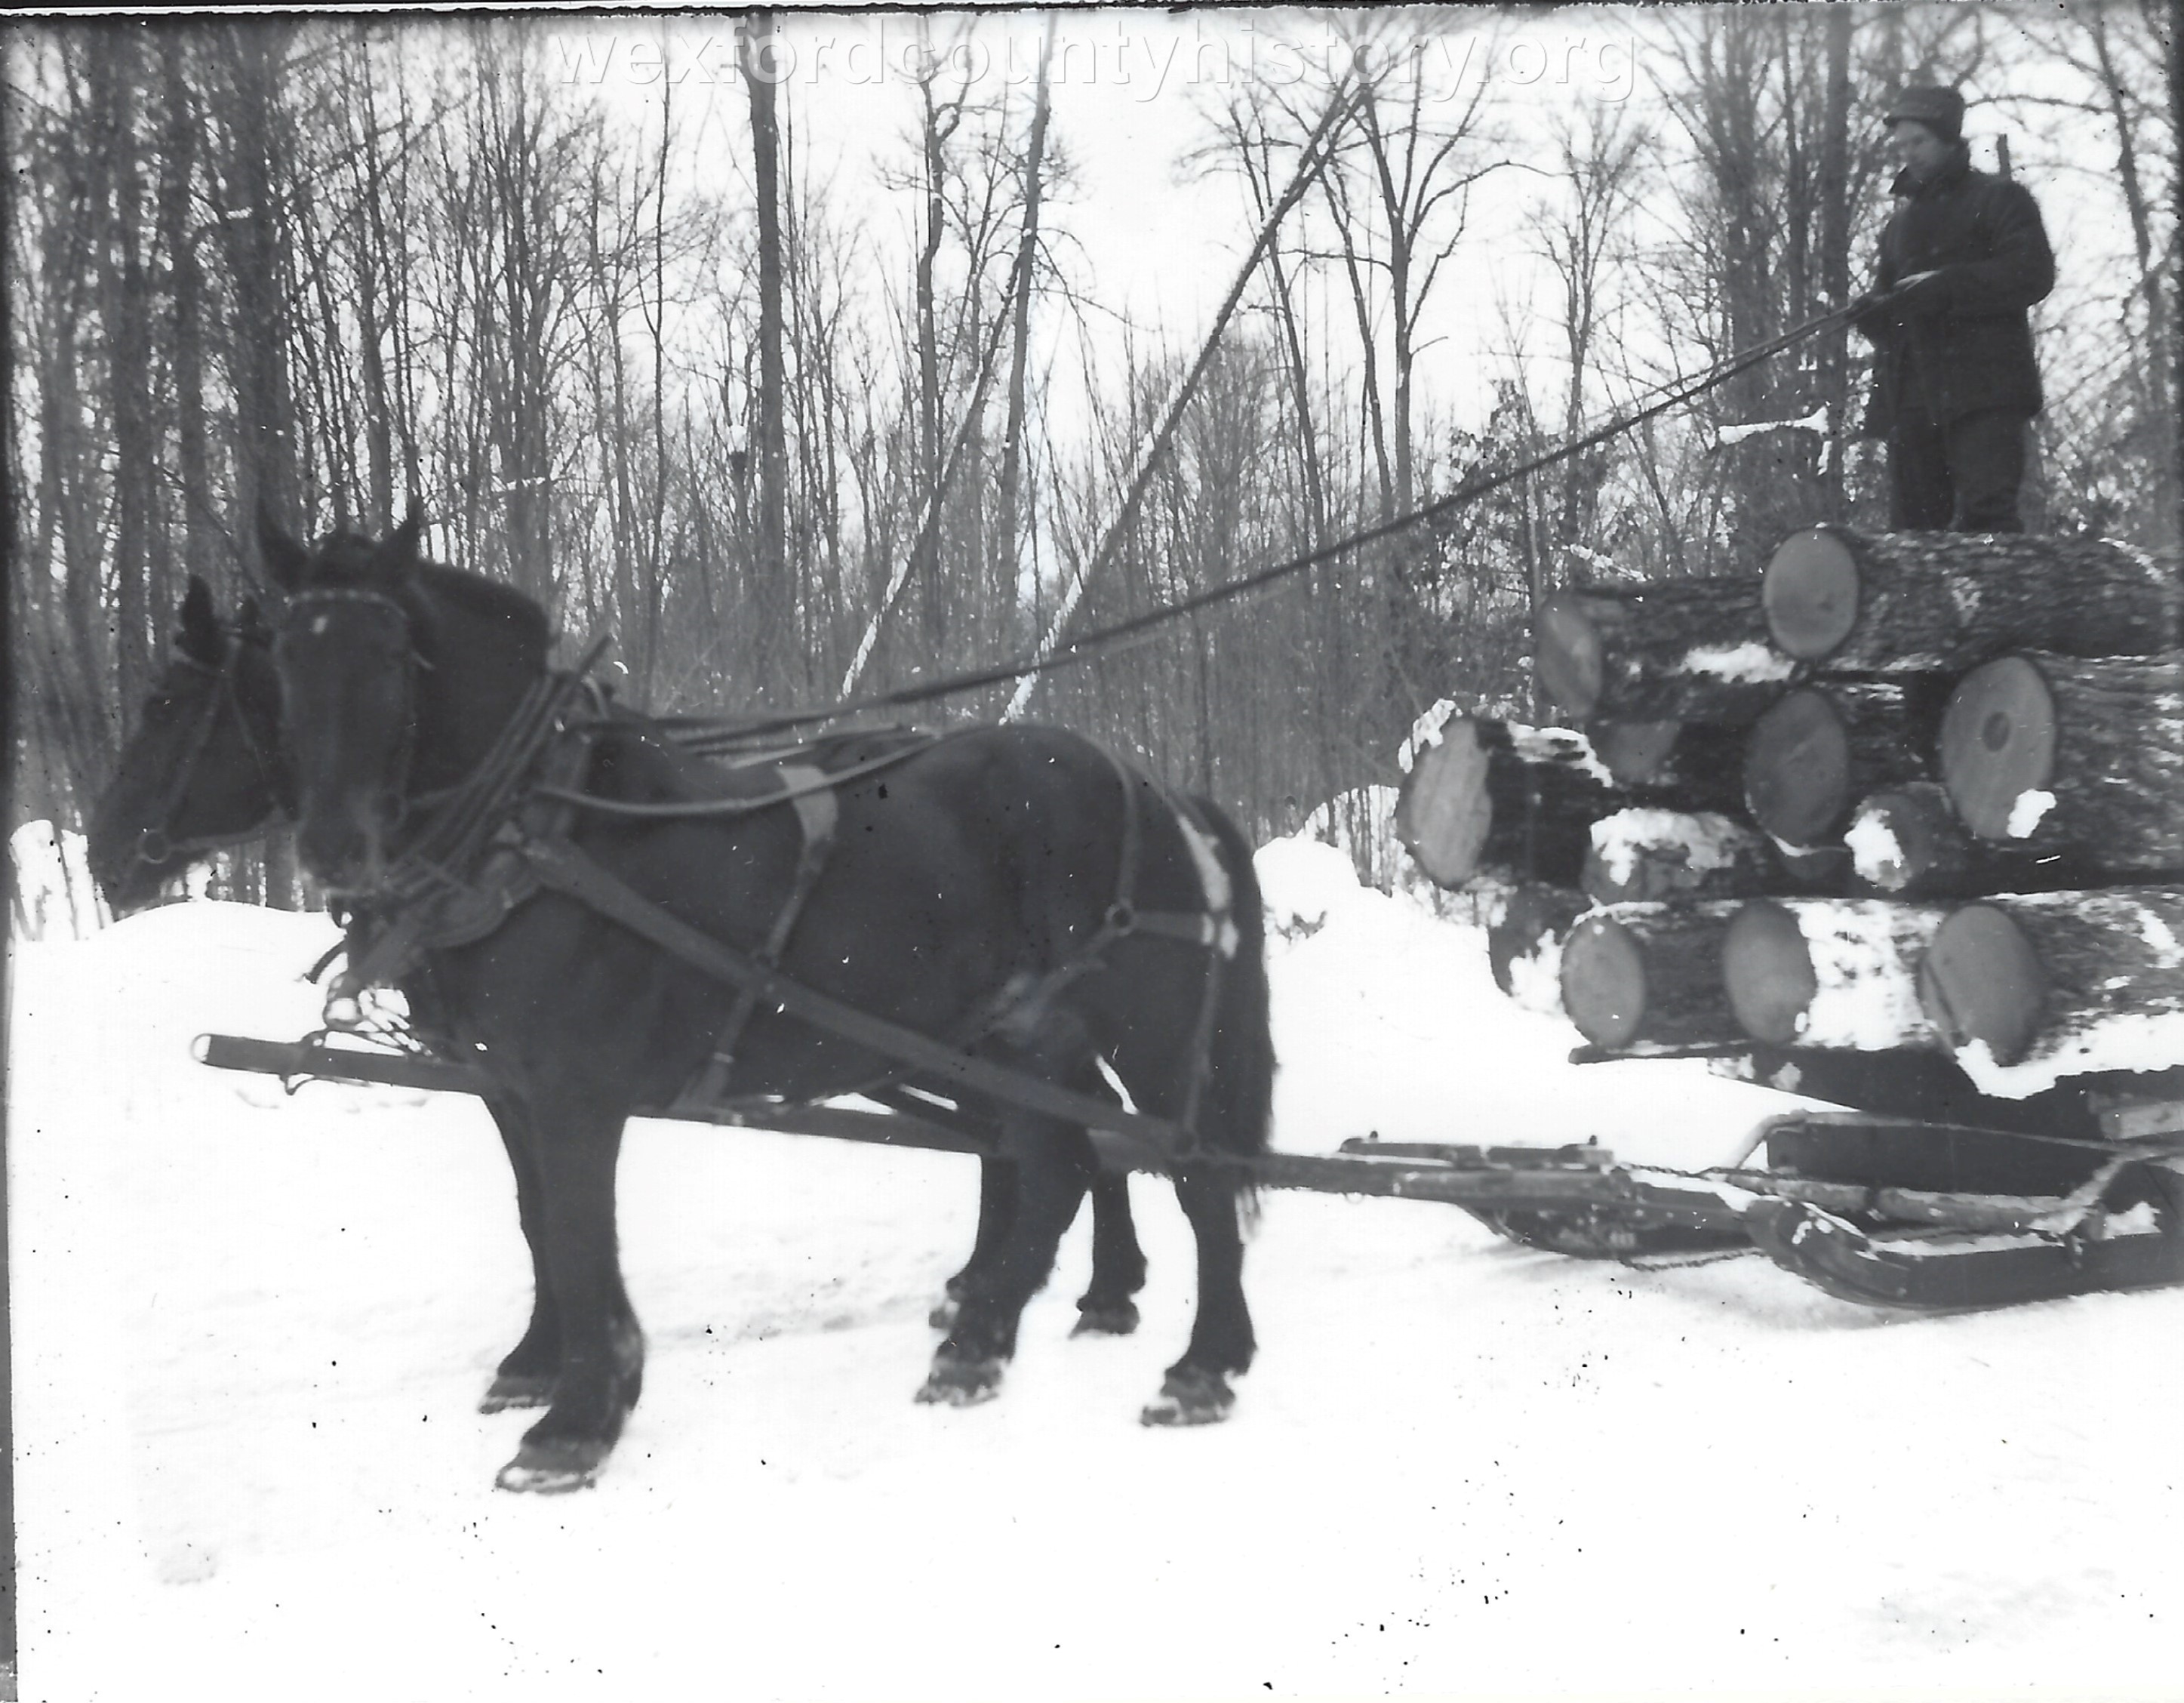 Cadillac-Lumber-Horse-Team-Pulling-Load-Of-Logs-On-Sled-1